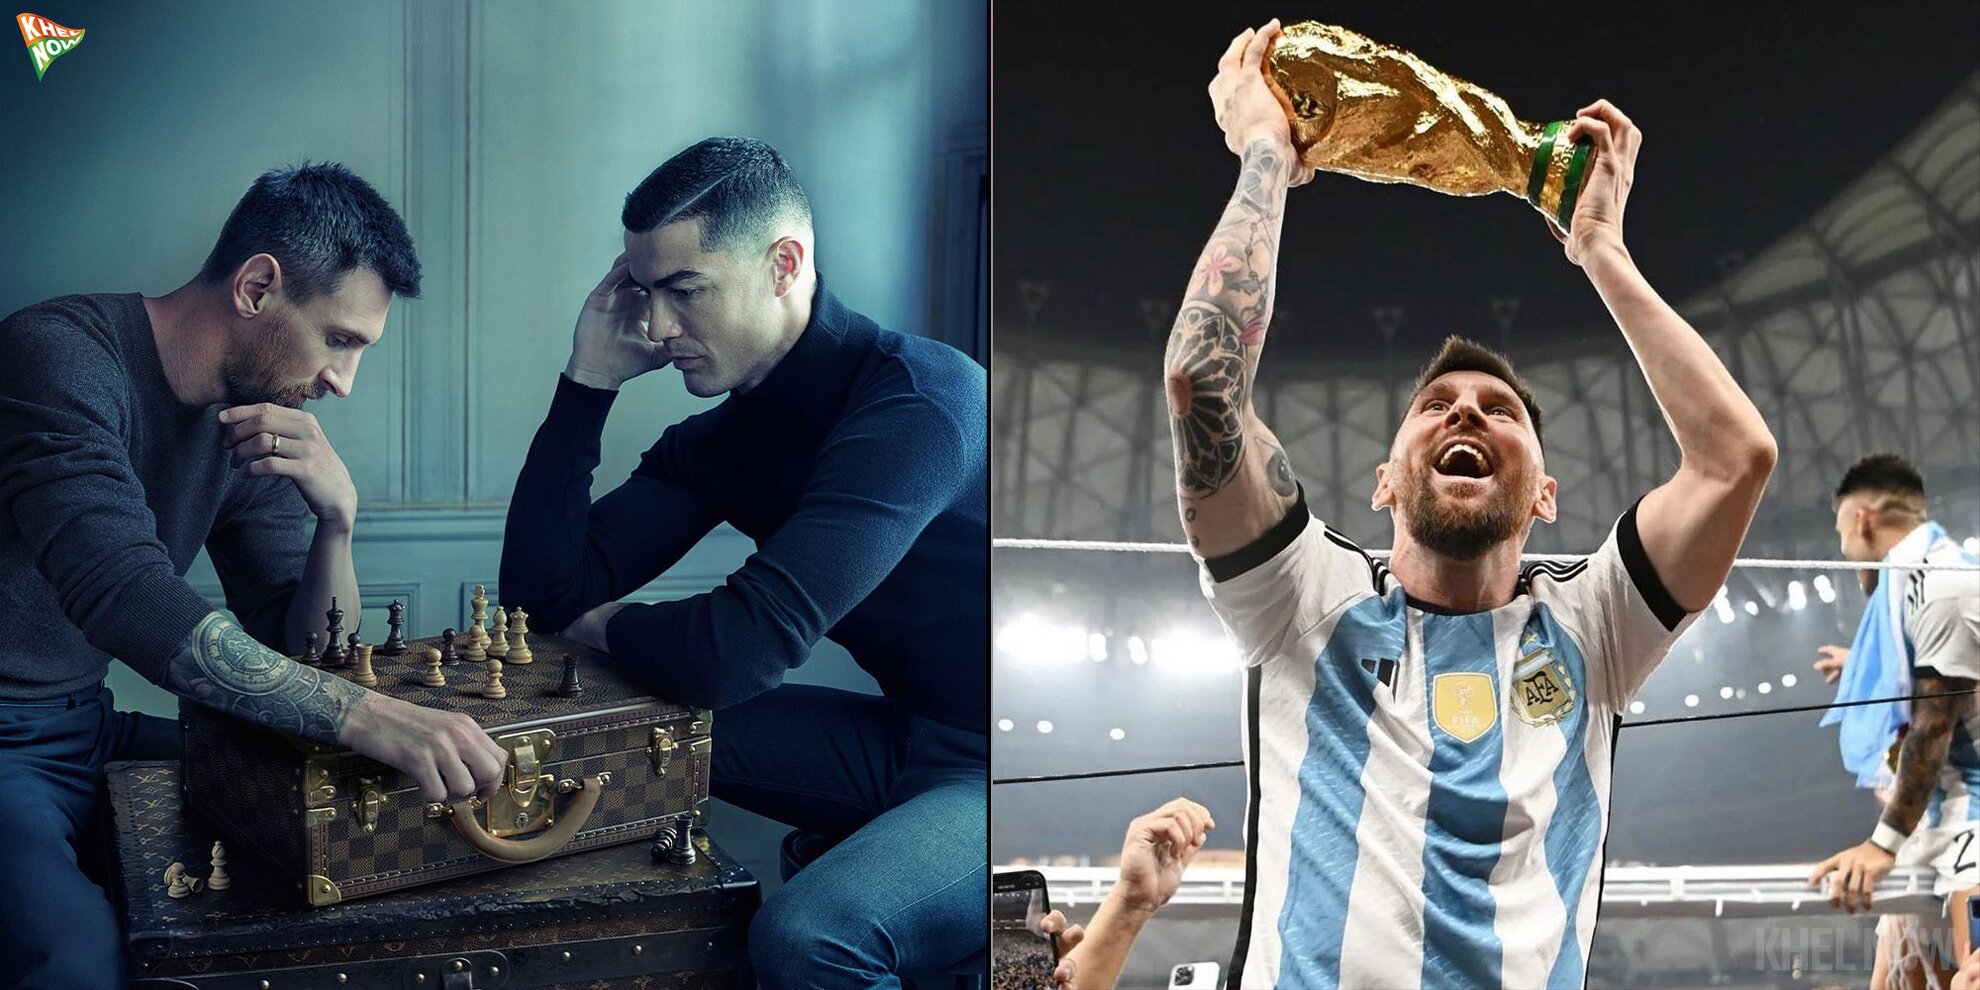 Top five most liked footballers’ posts on Instagram